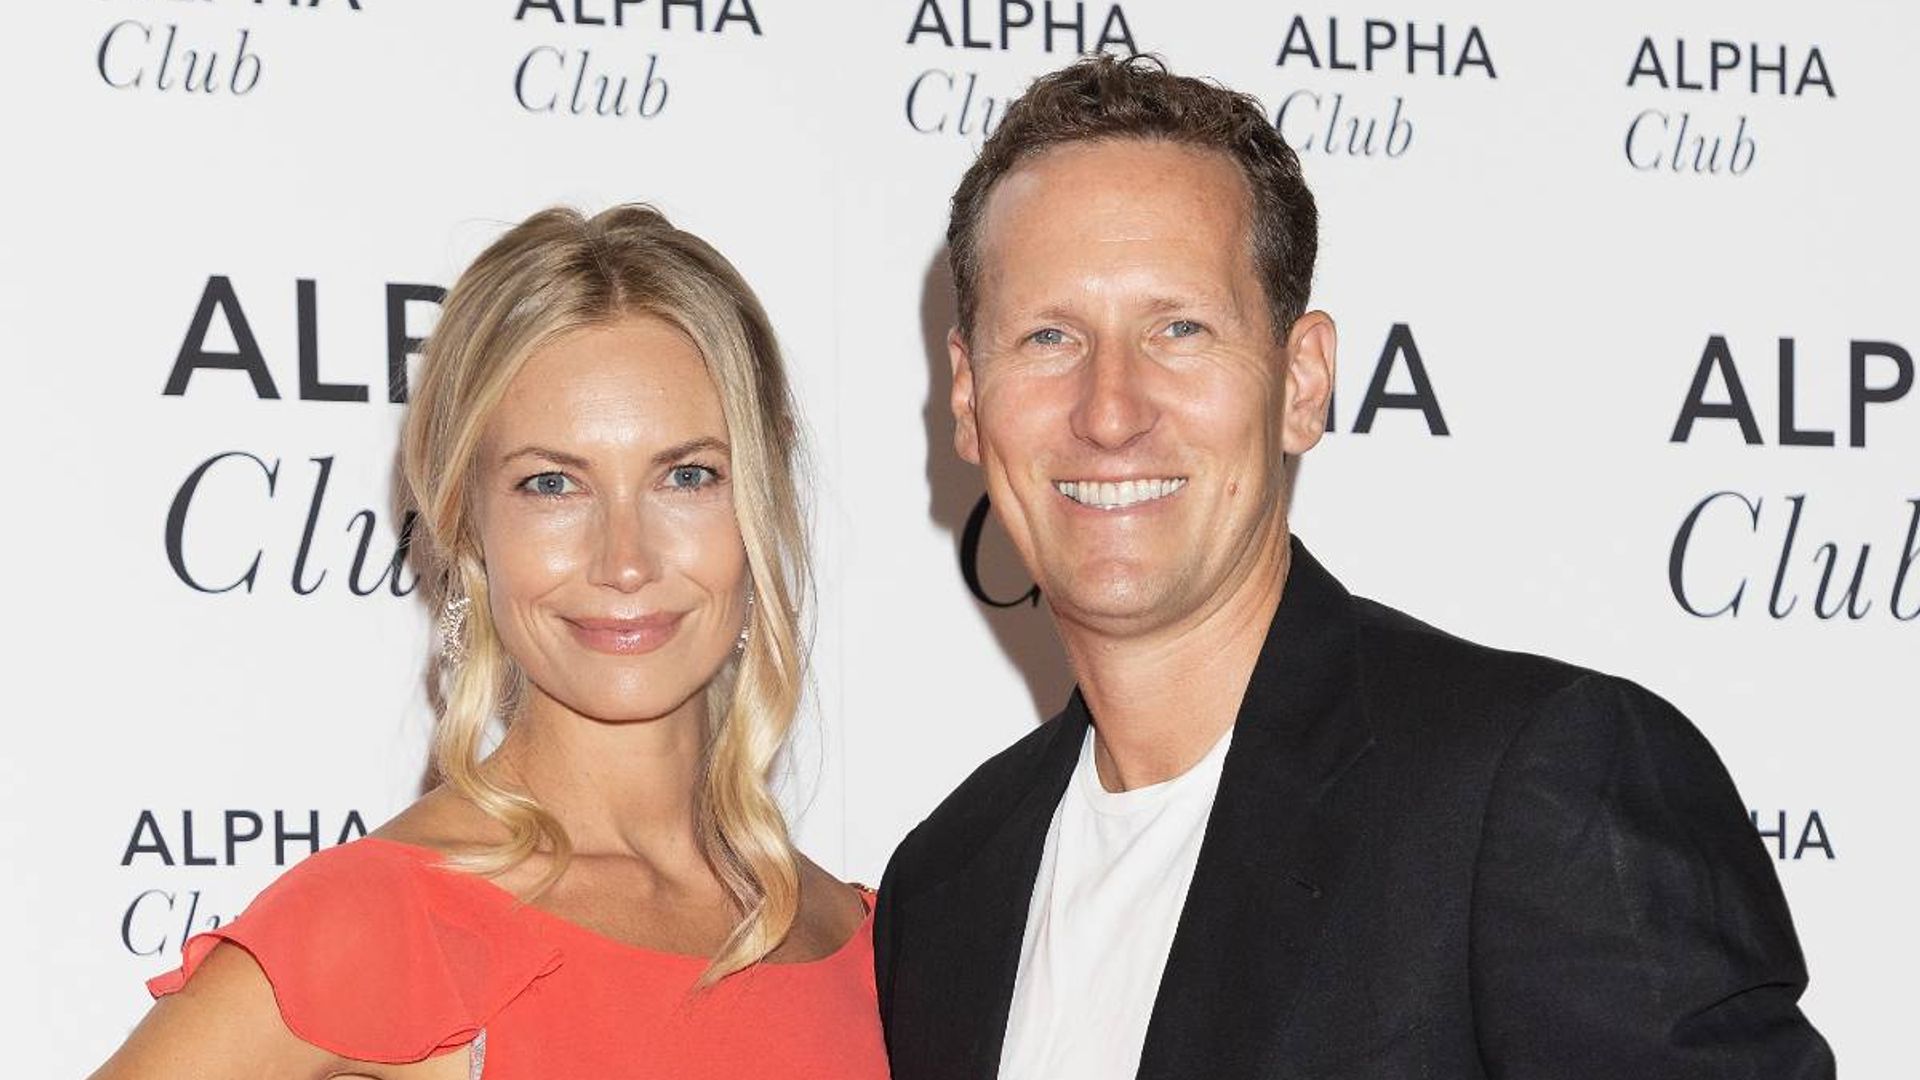 Brendan Cole shares rare photo with 'baby' daughter as he pays heartfelt tribute